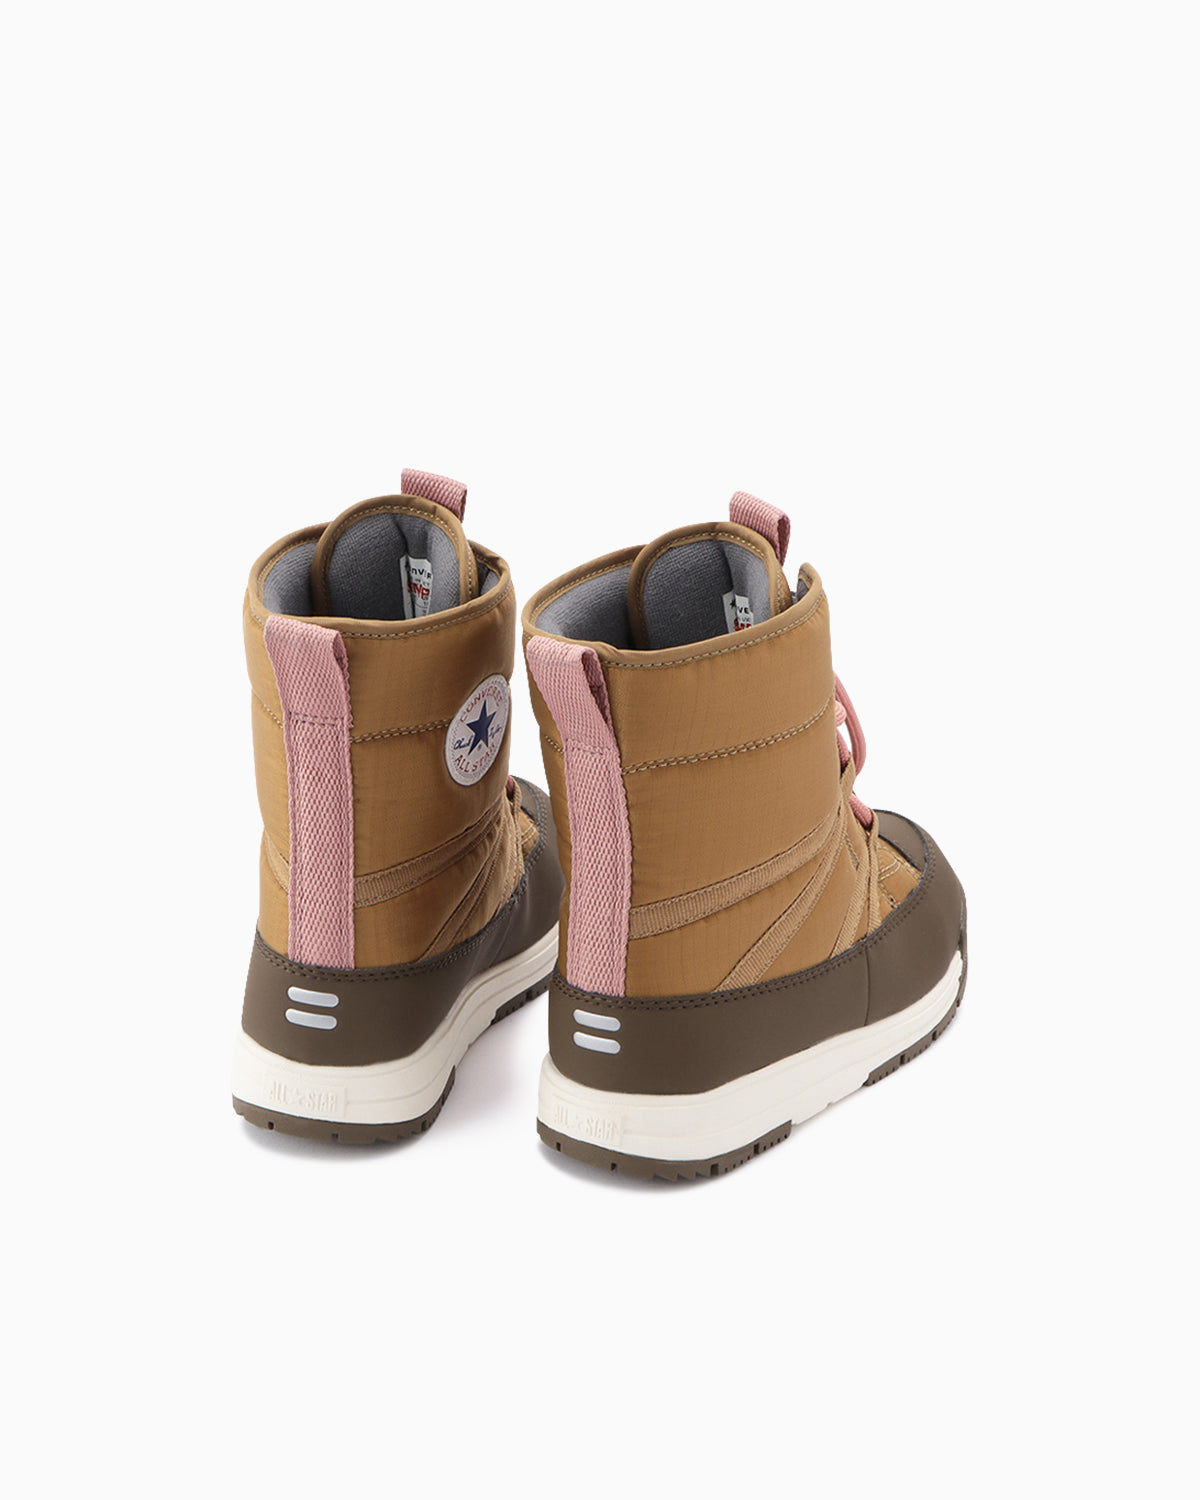 CHILD ALL STAR WP LU BOOTS